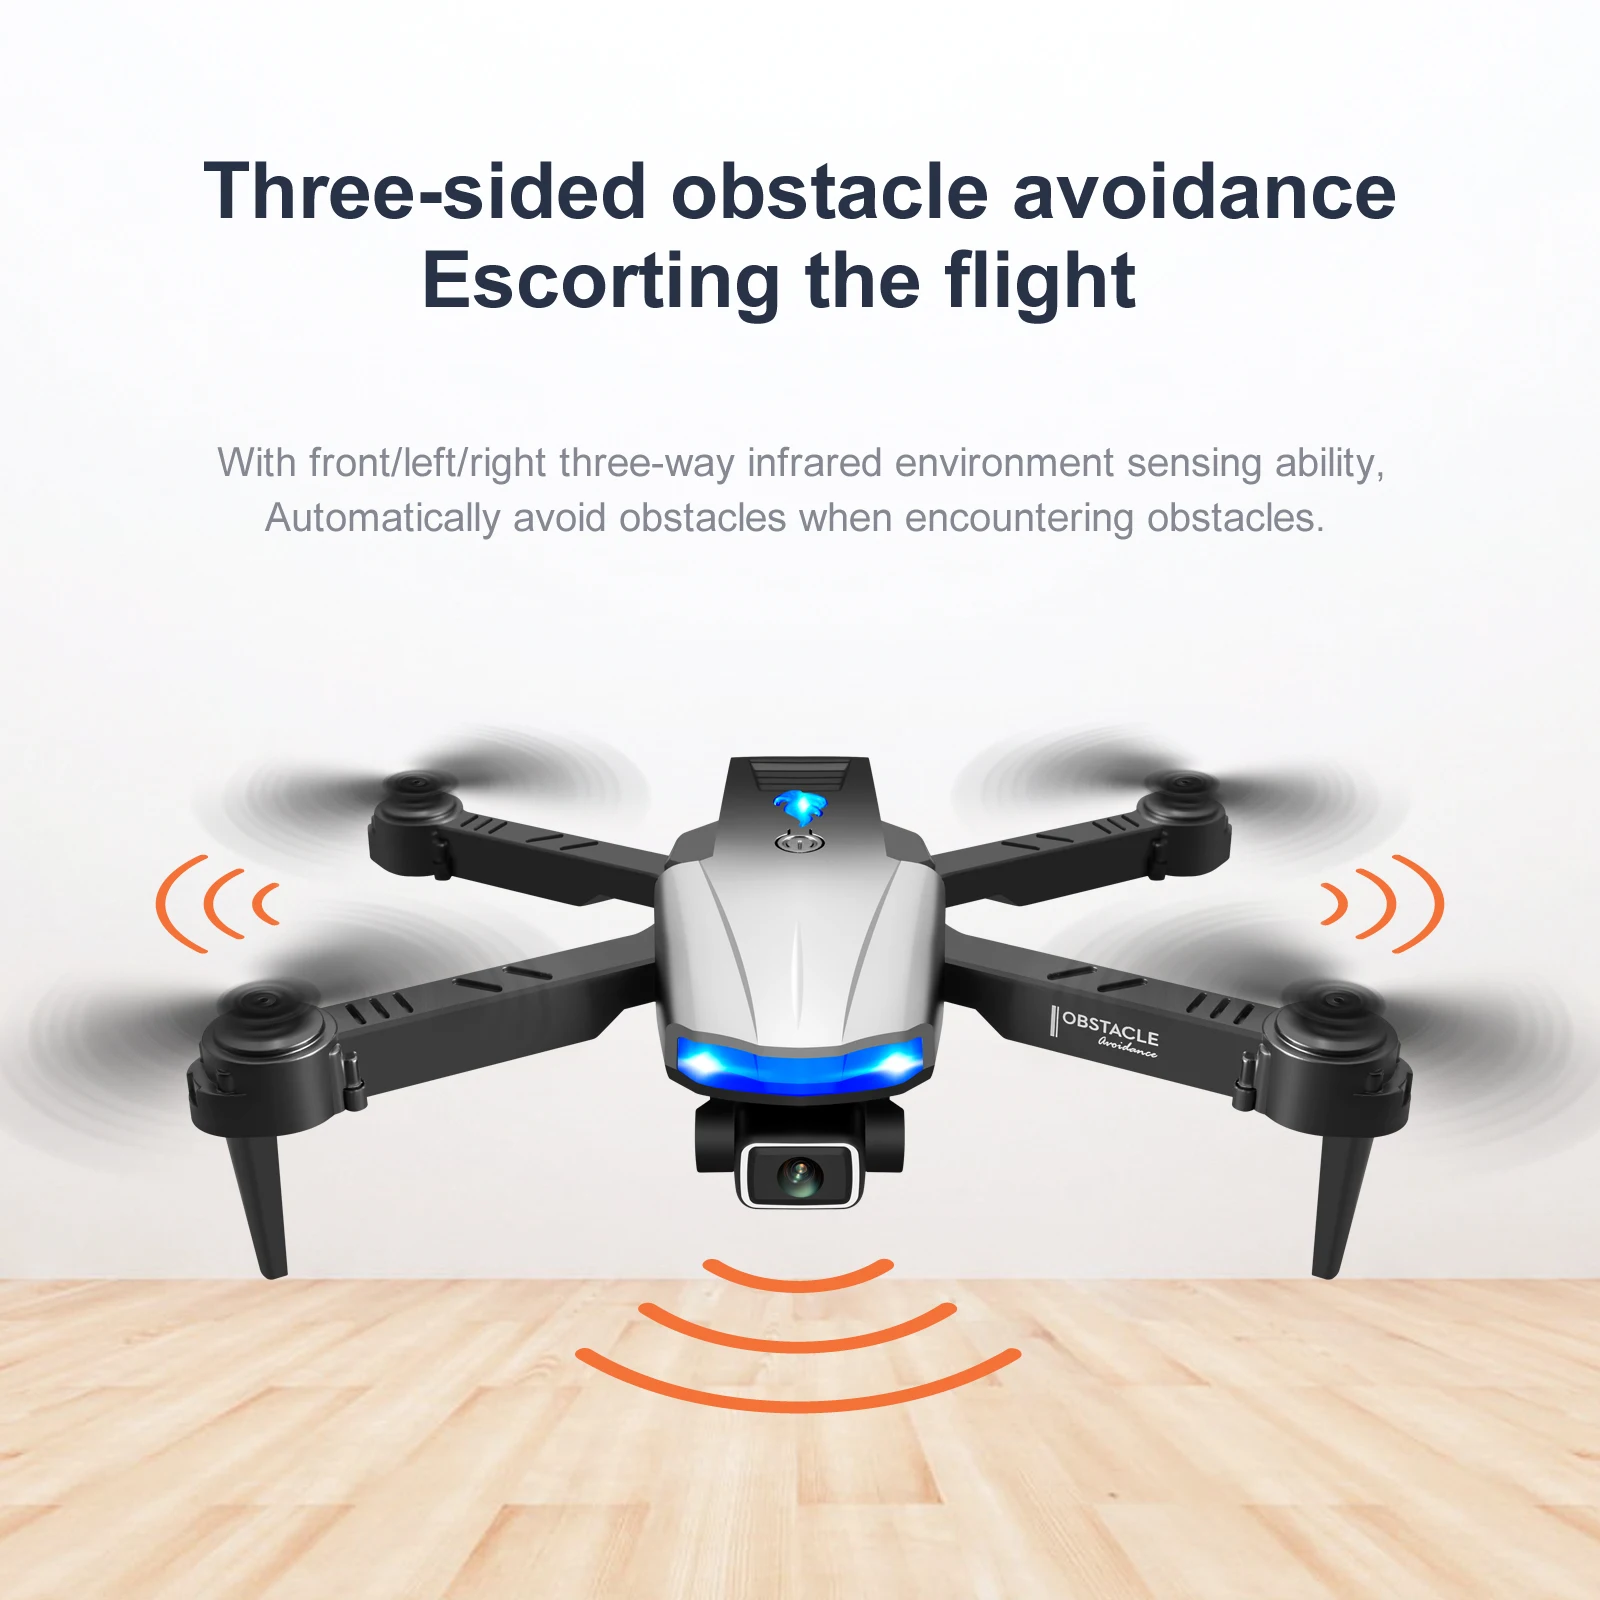 S85 Drone Professional Three-Sided Obstacle Avoidance Drone Quadcopter 4k Aerial HD Dual Camera Folding Remote Control Aircraft enlarge